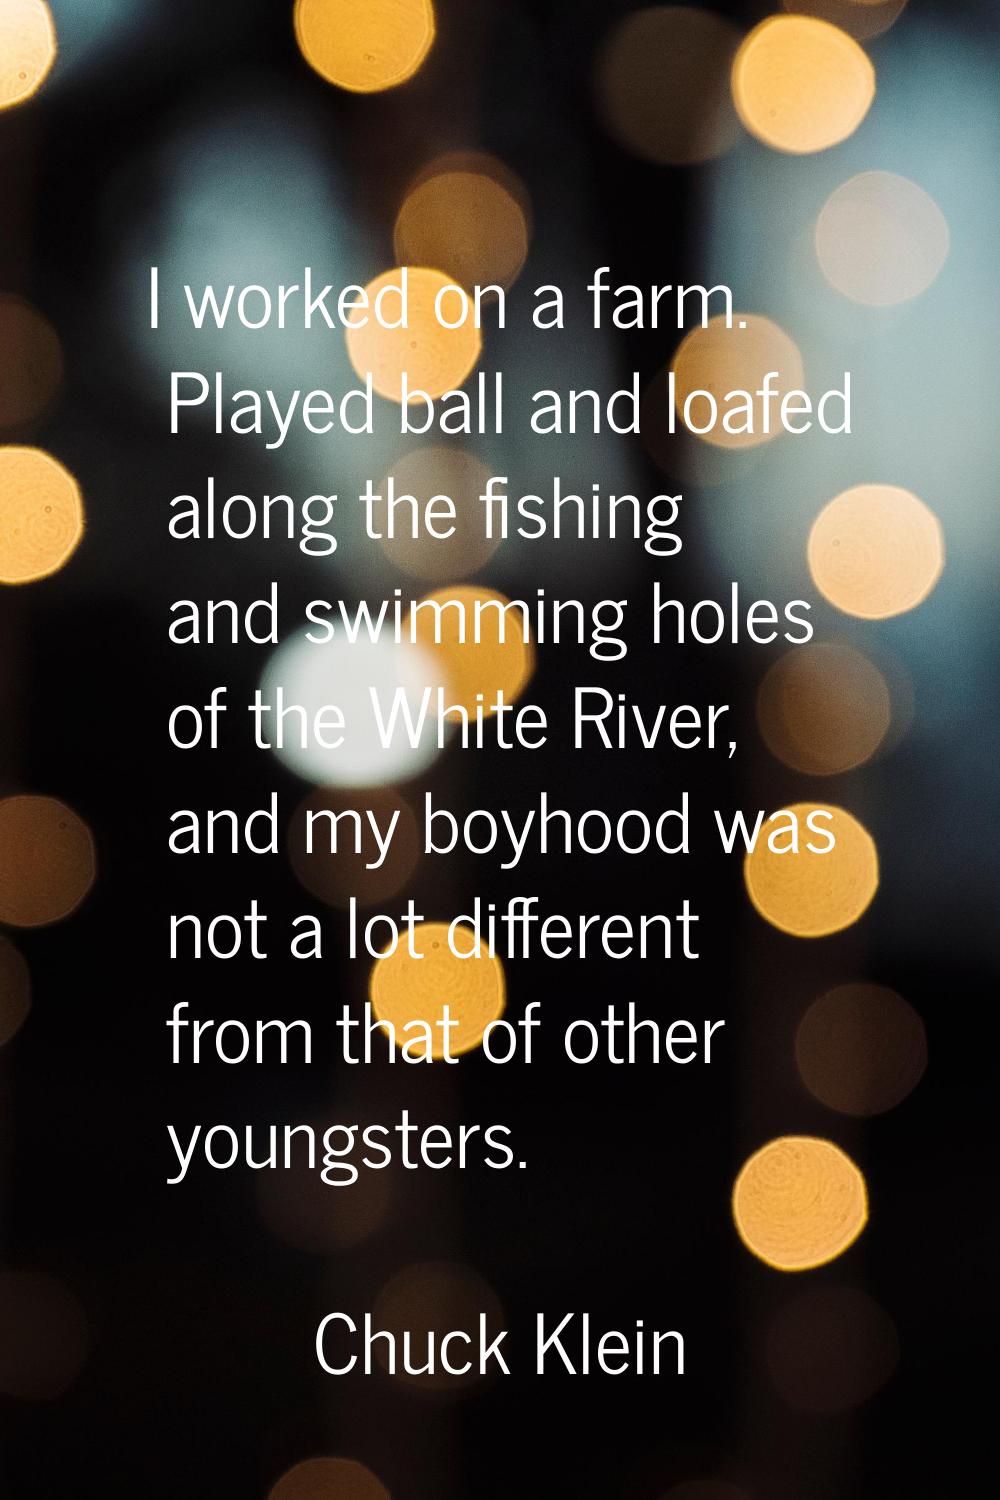 I worked on a farm. Played ball and loafed along the fishing and swimming holes of the White River,